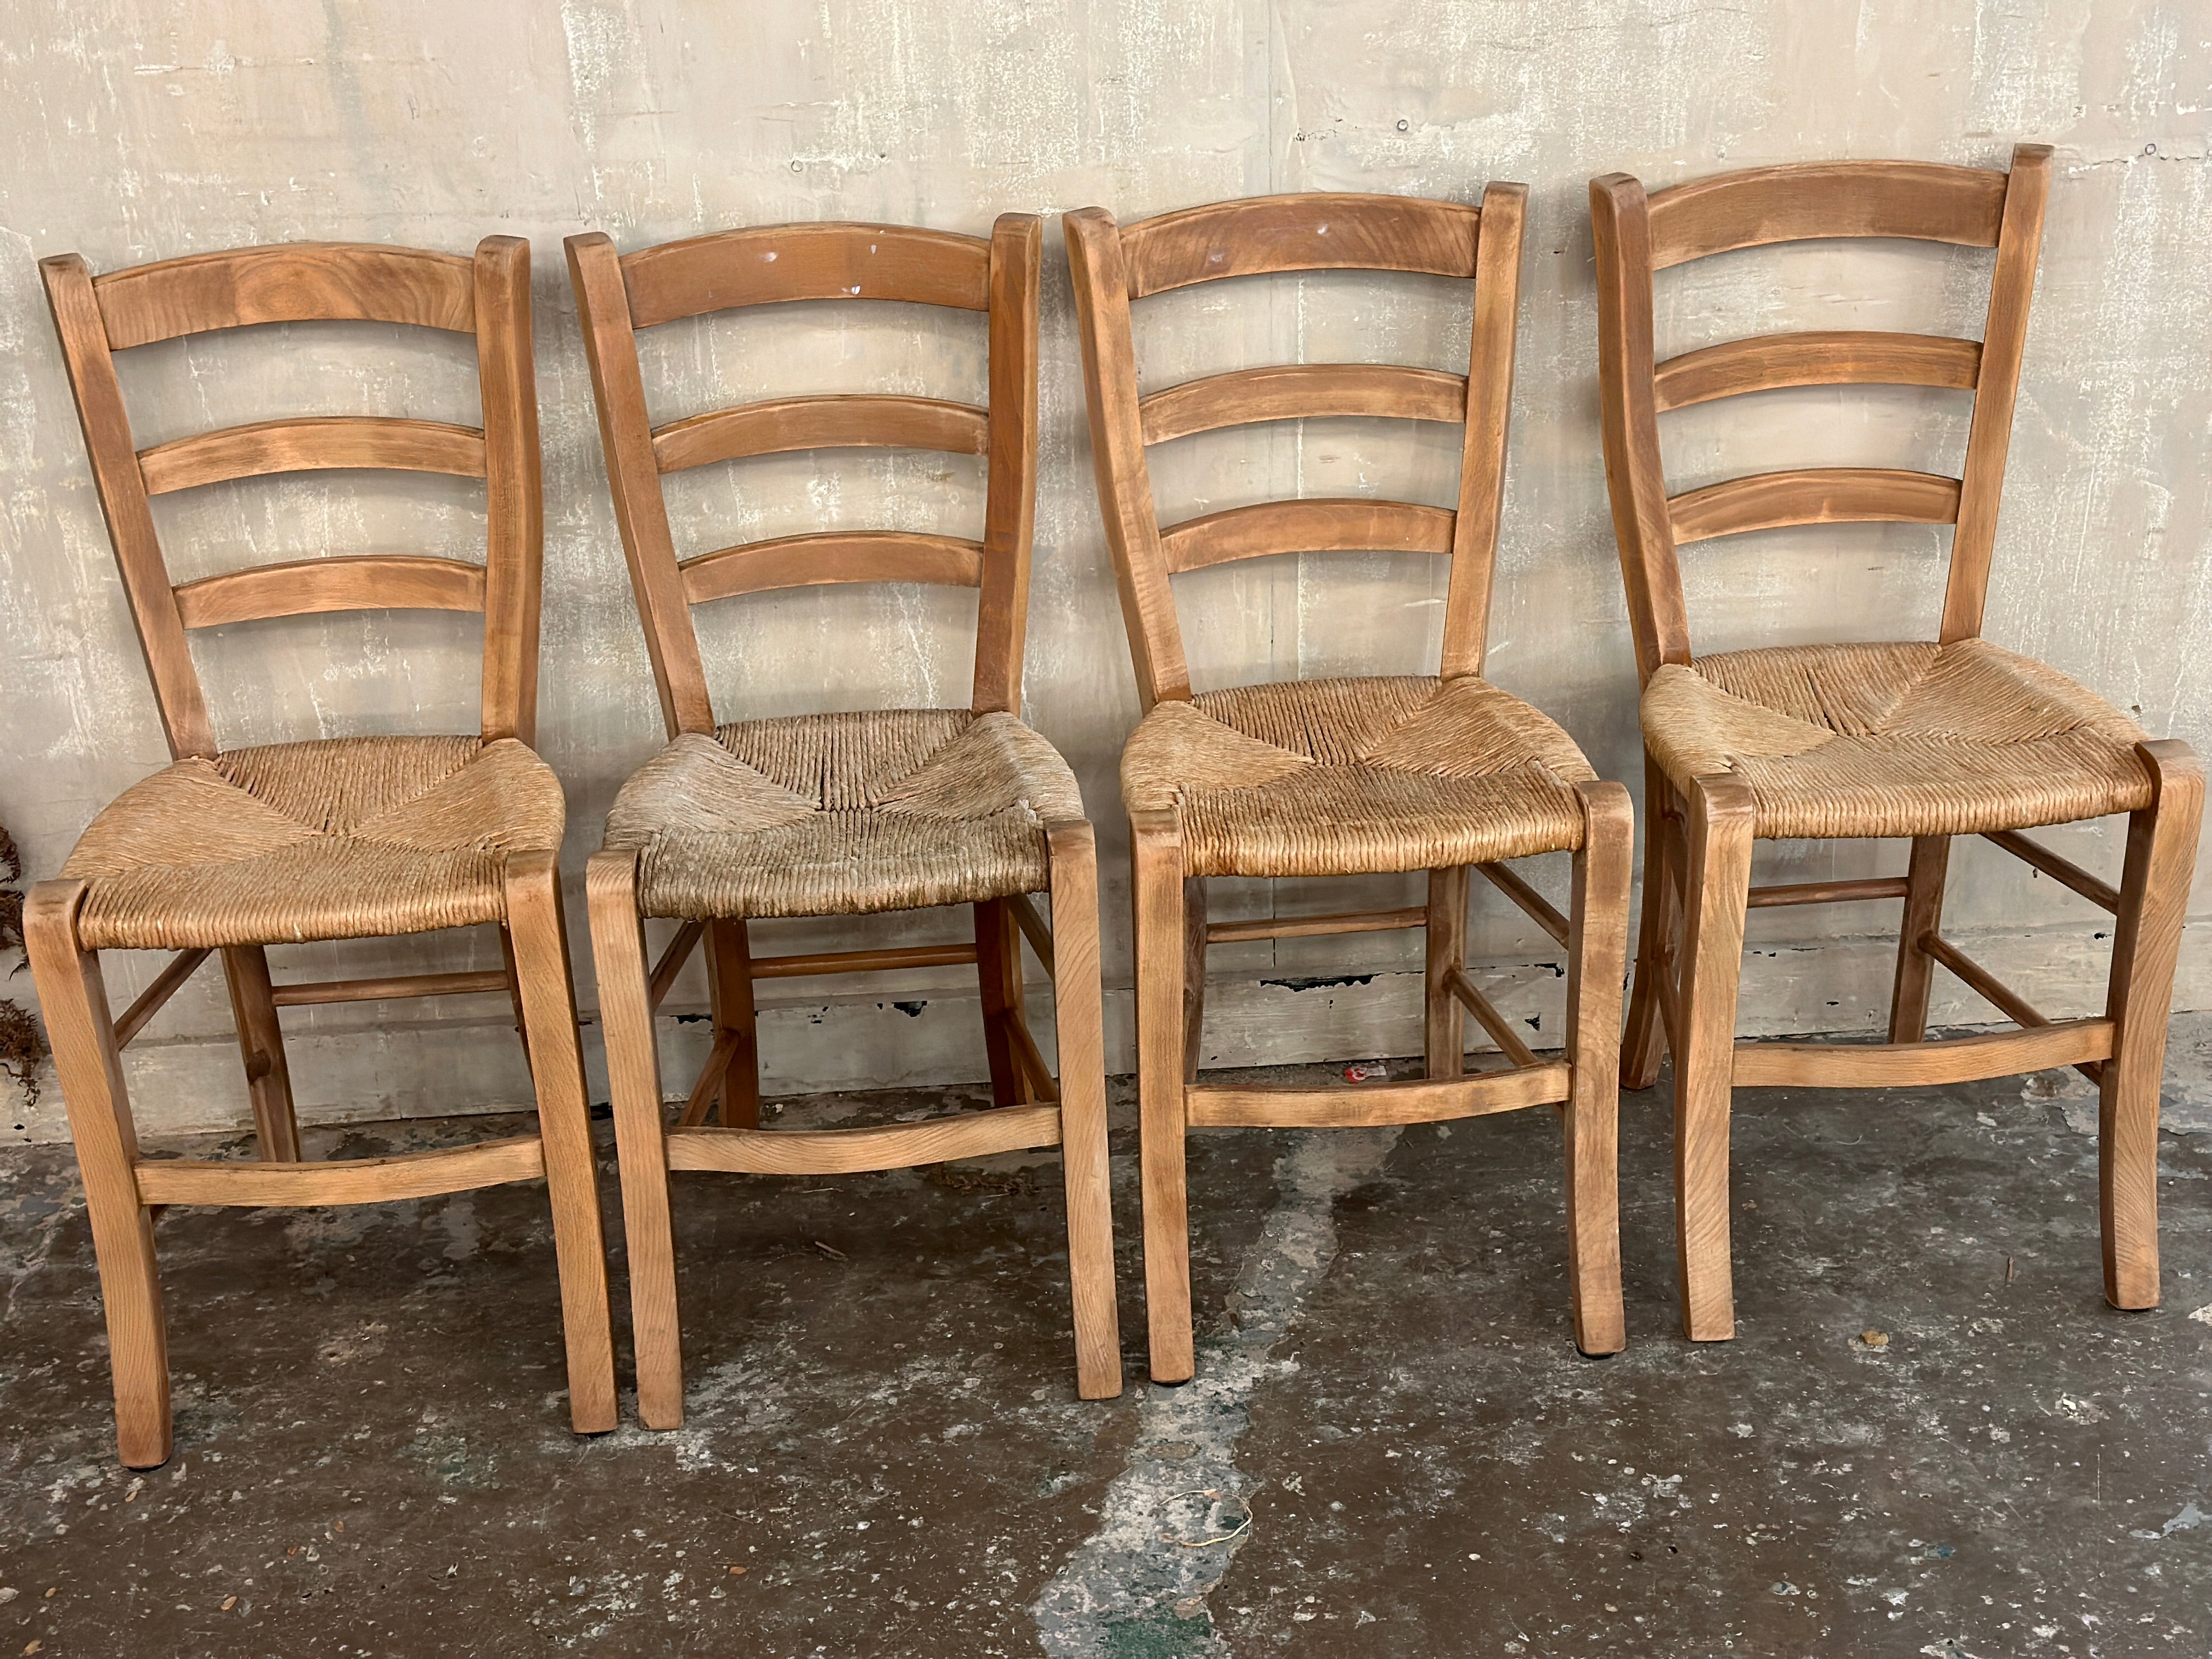 Set of 4 French dinning chairs